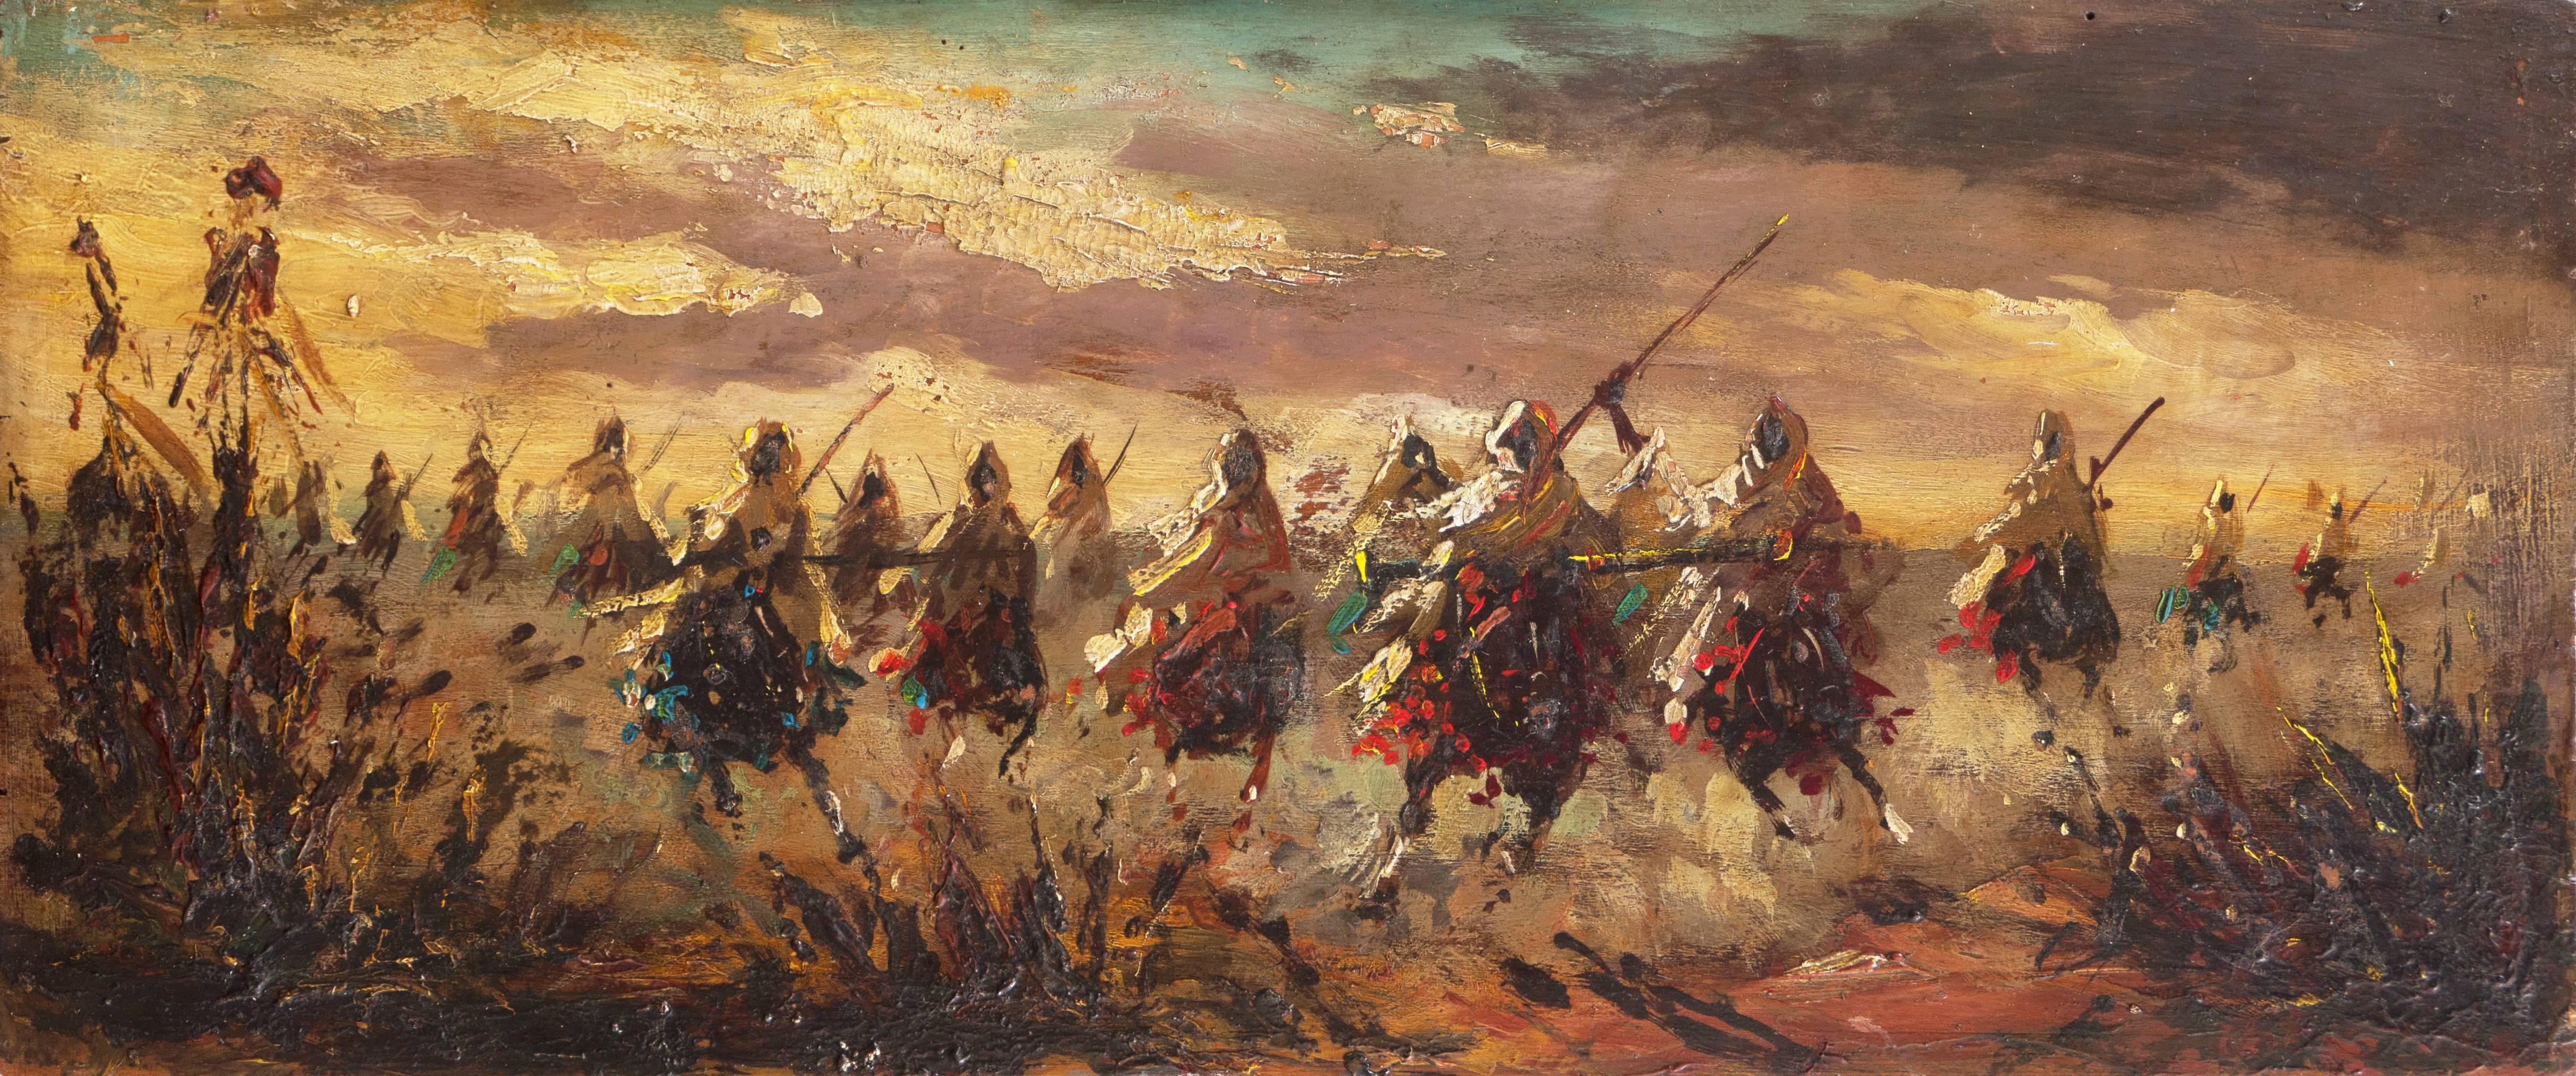 Unknown Figurative Painting - 'Orientalist Berber Cavalry Charge', French Romantic School